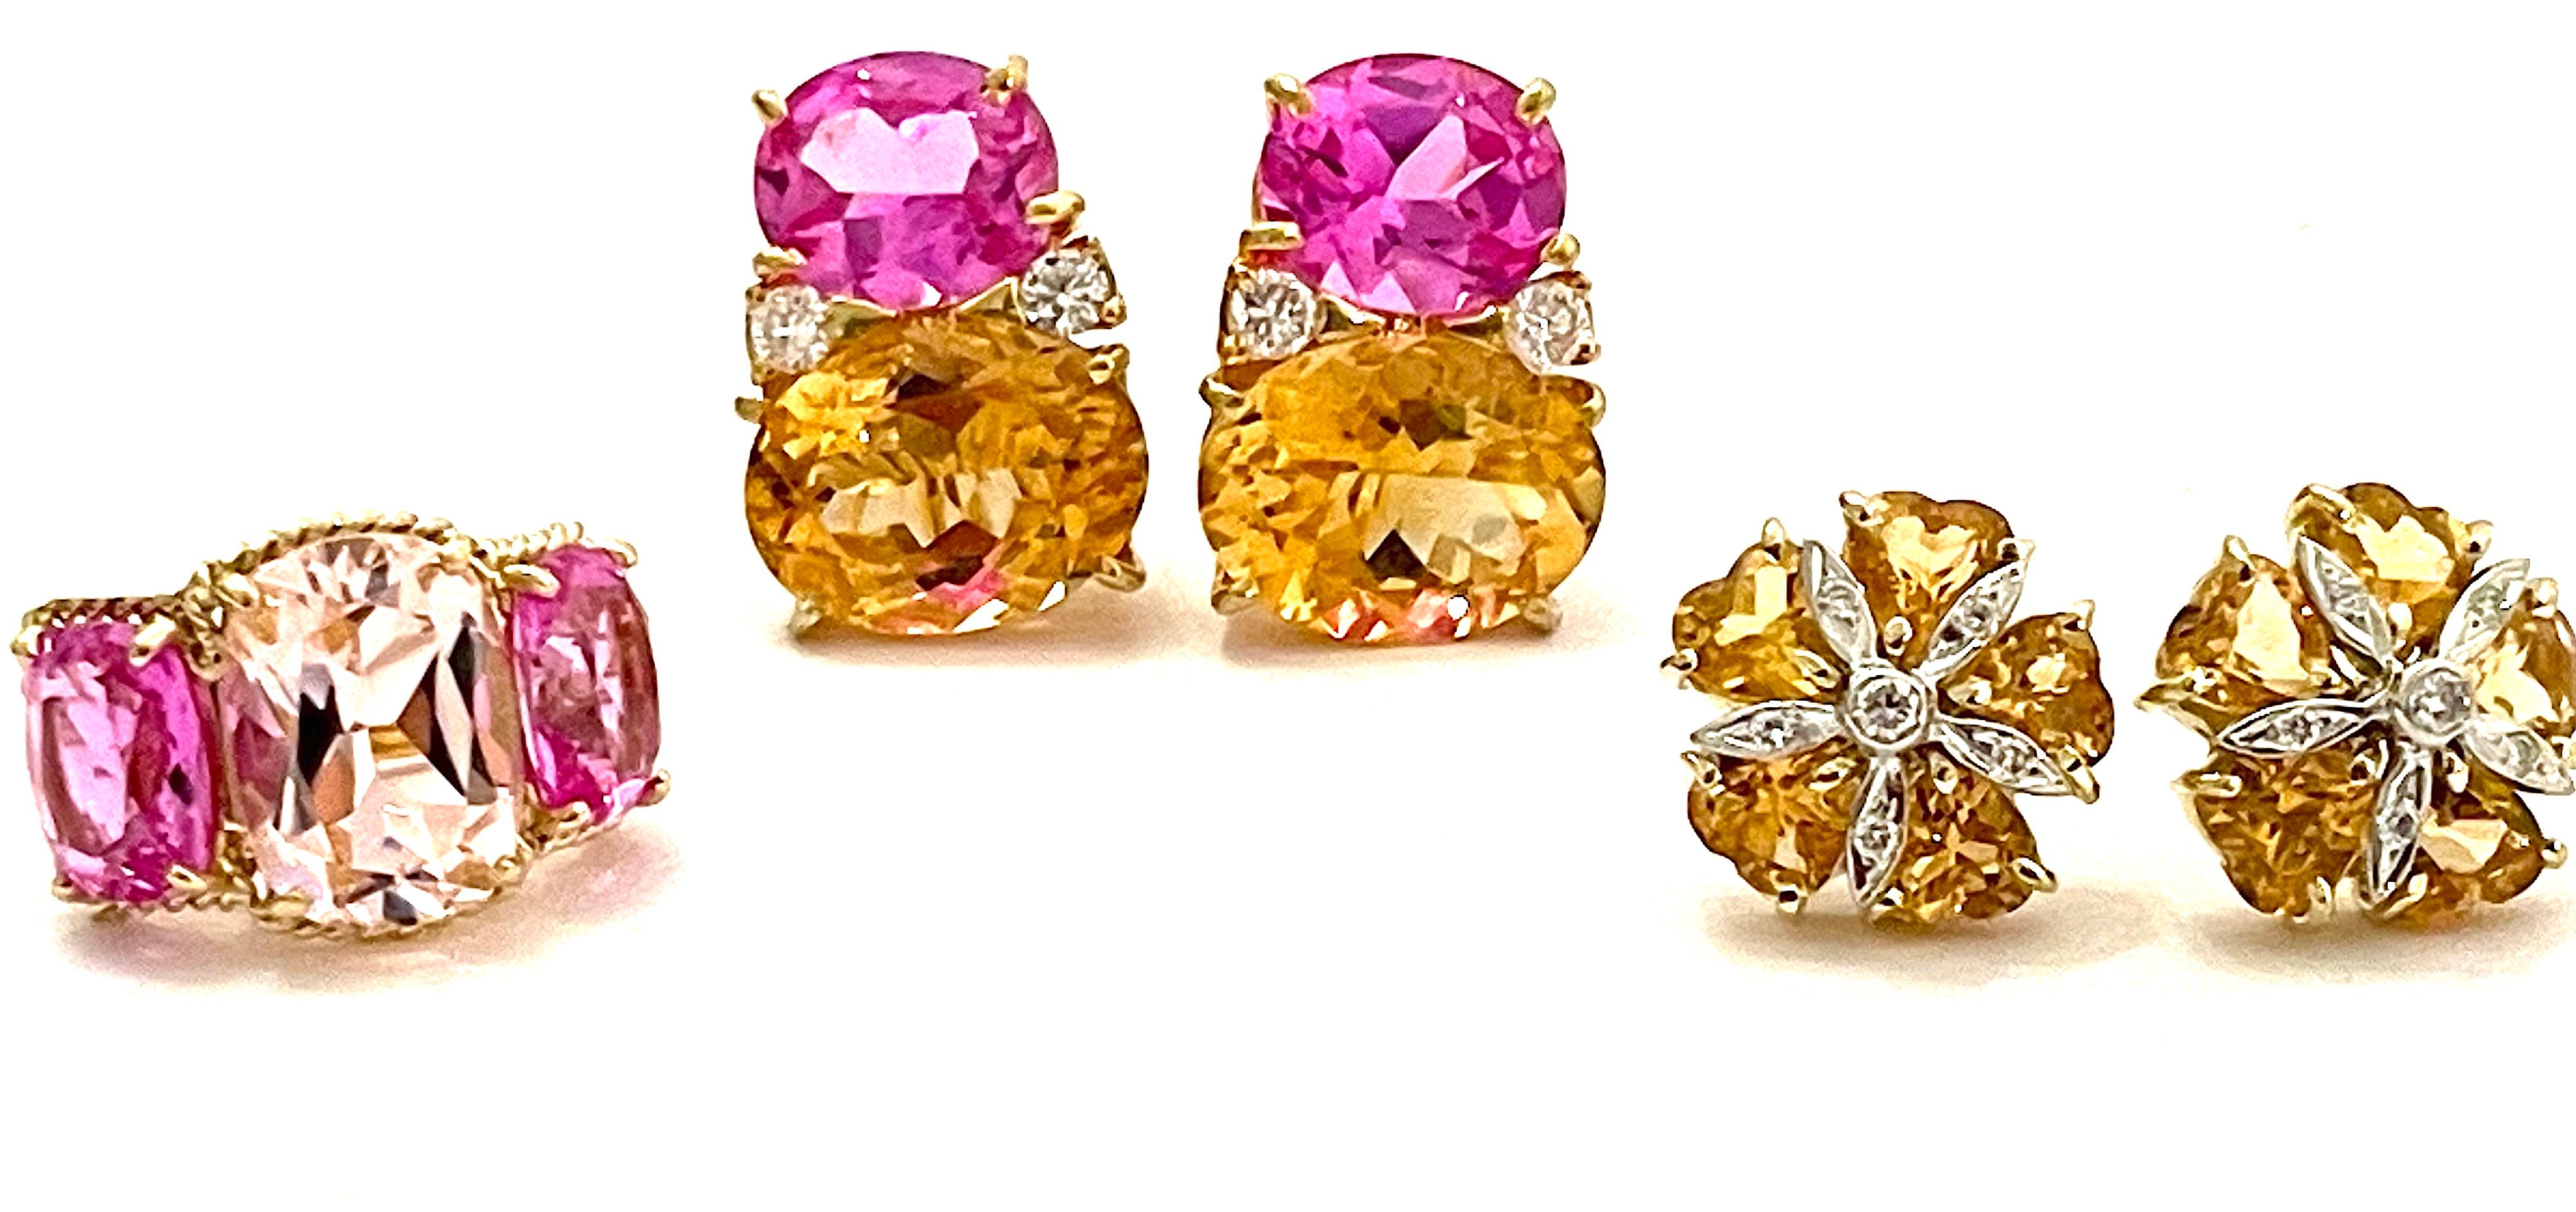 Elegant Three-Stone Rock Crystal and Pink Topaz Ring with Gold Rope Twist Border For Sale 4